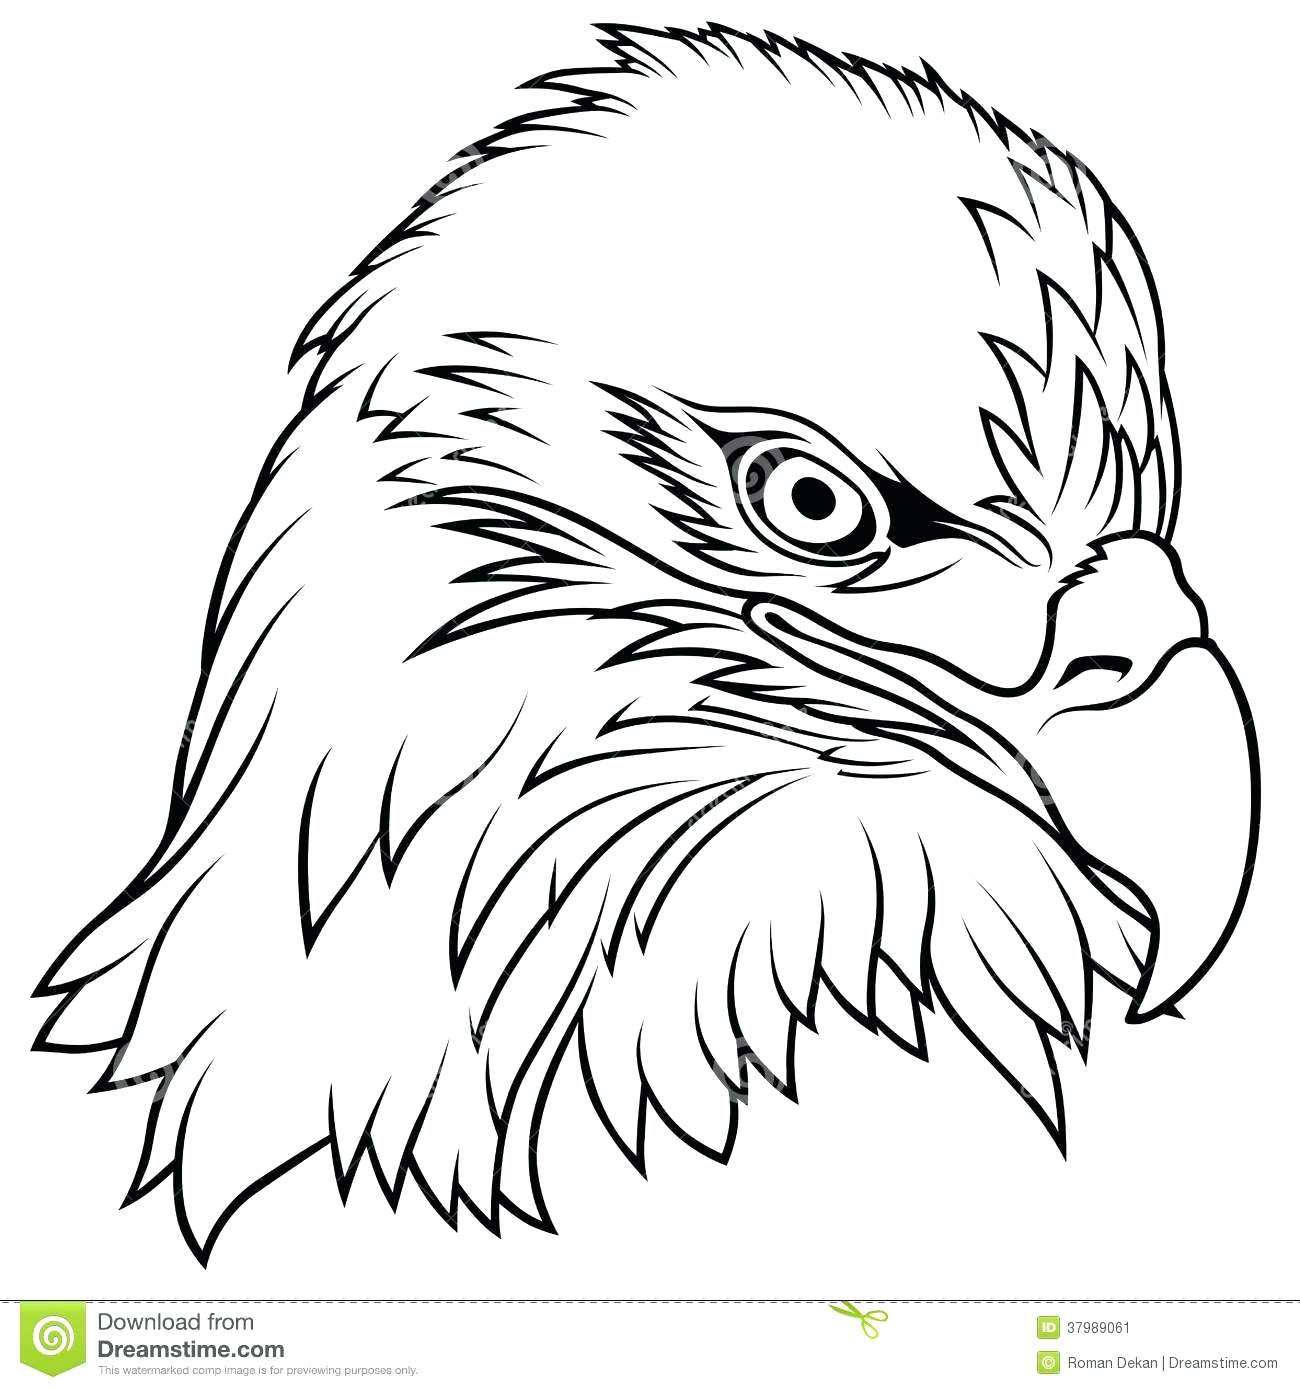 Bald Eagle Easy Drawing at GetDrawings Free download